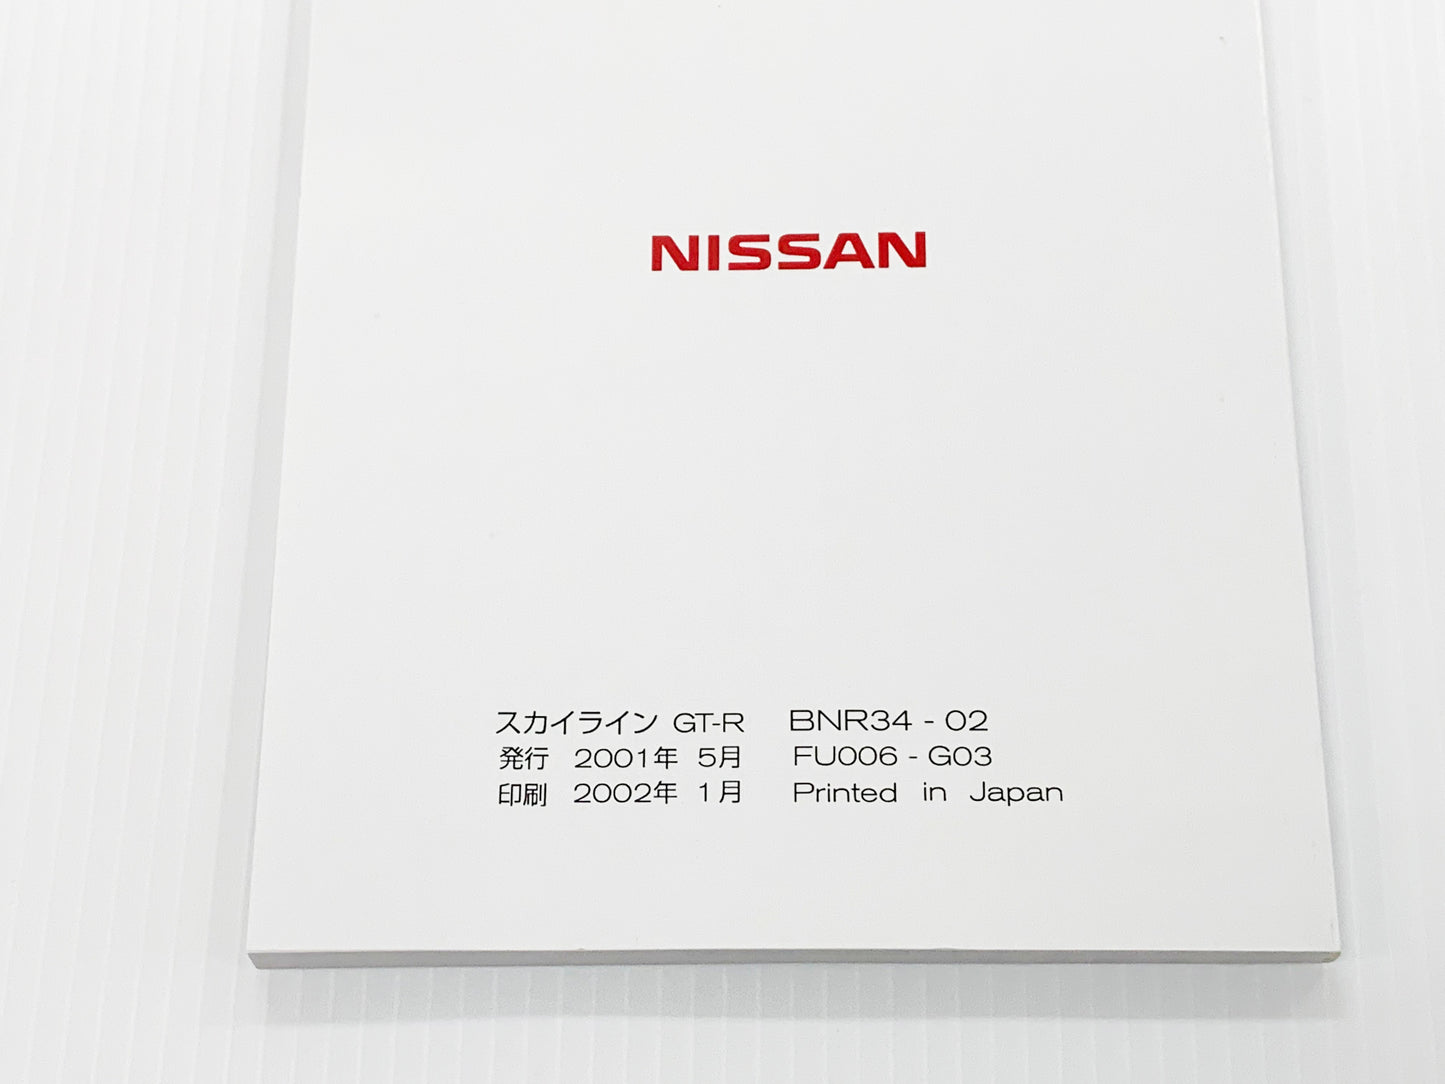 Nissan Owners Manual Book - BNR34 2002/1-2002/8 #663181374